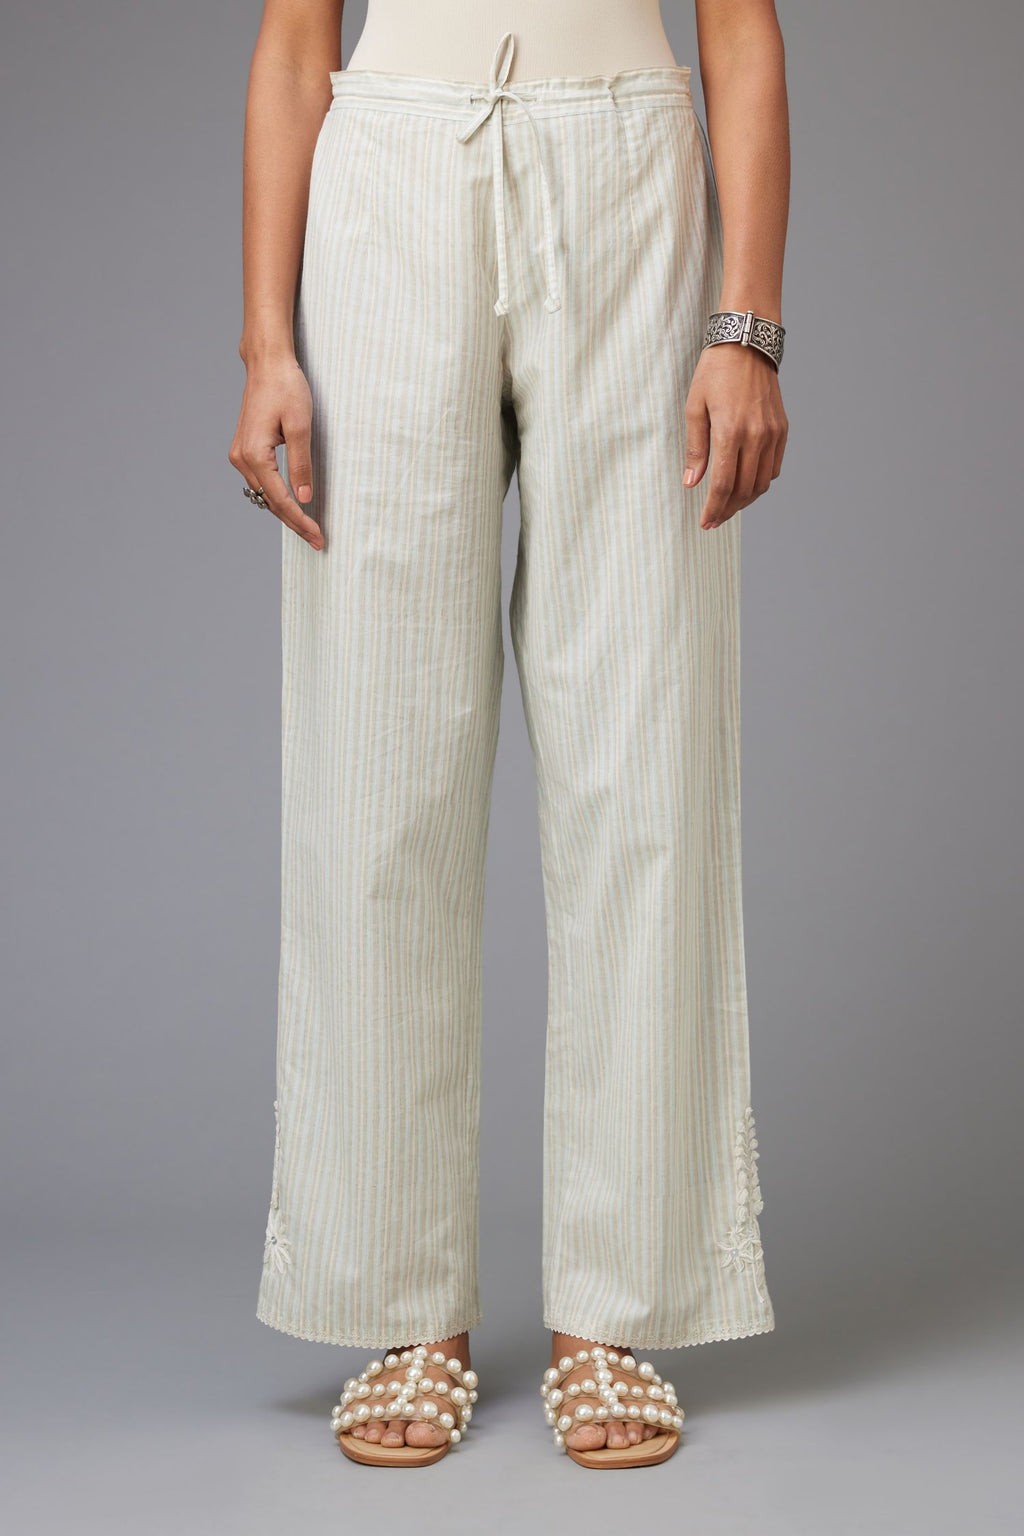 Blue and grey printed stripe Cotton straight pants with a chiffon embroidered boota at the hem.